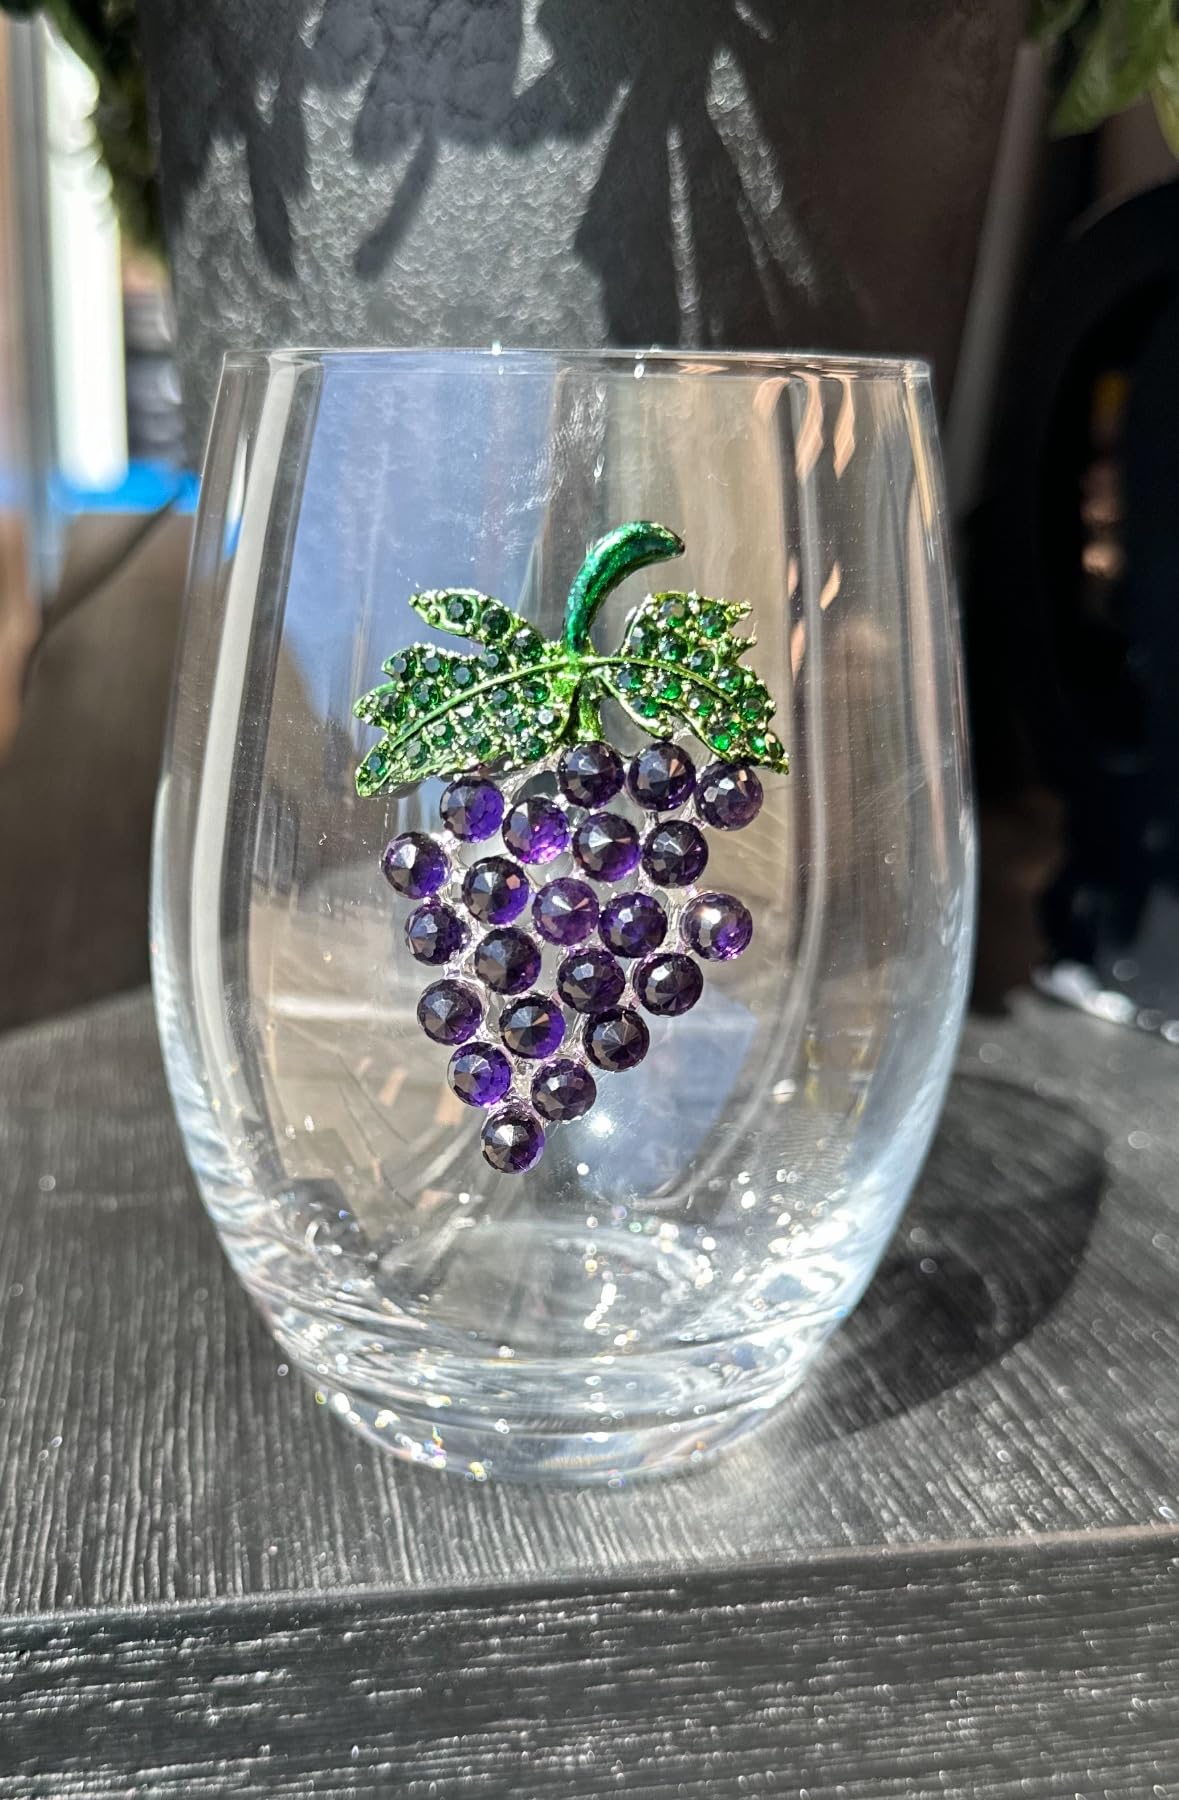 THE QUEENS' JEWELS Purple Grapes Jeweled Stemless Wine Glass, 21 oz. - Unique Gift for Women, Birthday, Cute, Fun, Not Painted, Decorated, Bling, Bedazzled, Rhinestone